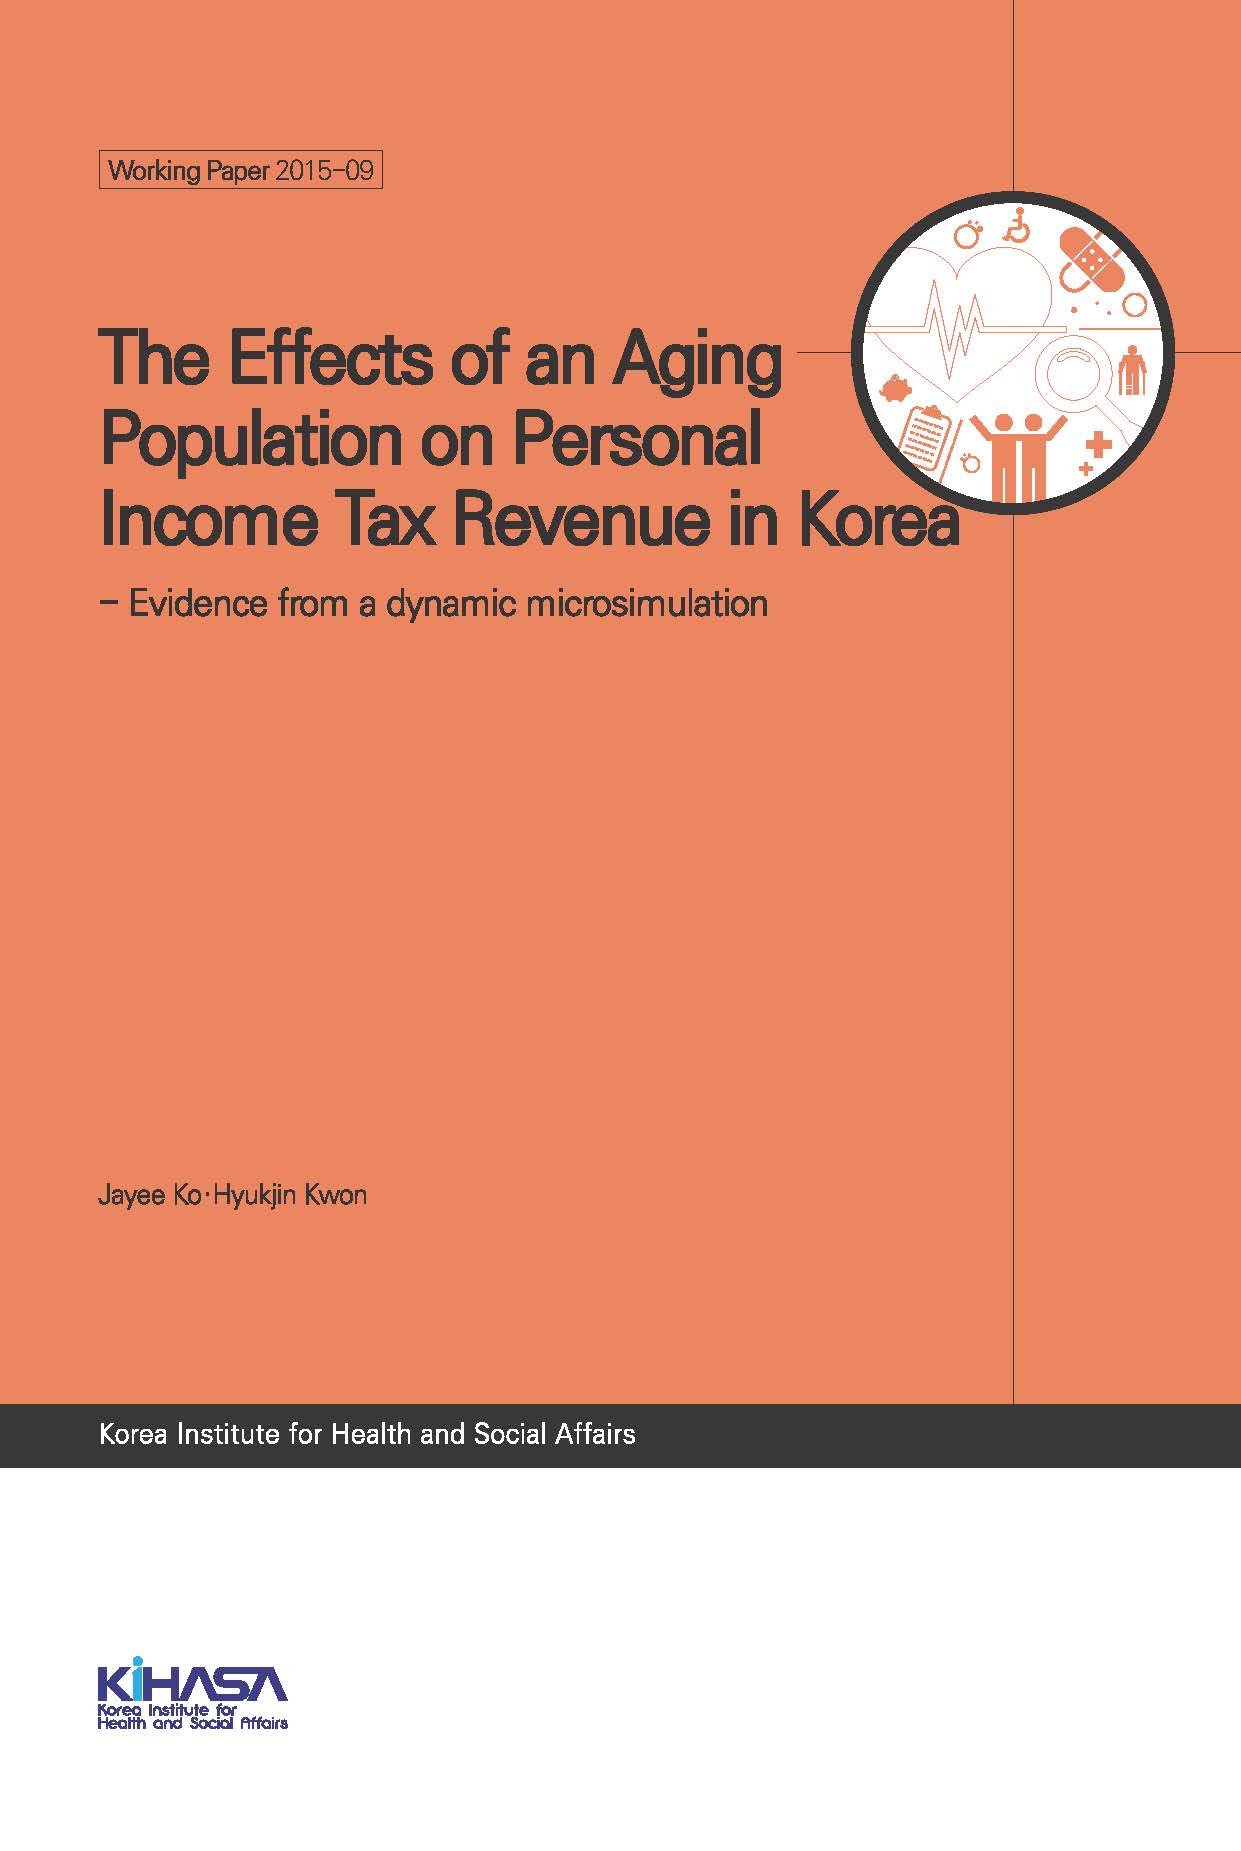 The Effects of an Aging Population on Personal Income Tax Revenue in Korea - Evidence from a dynamic microsimulation